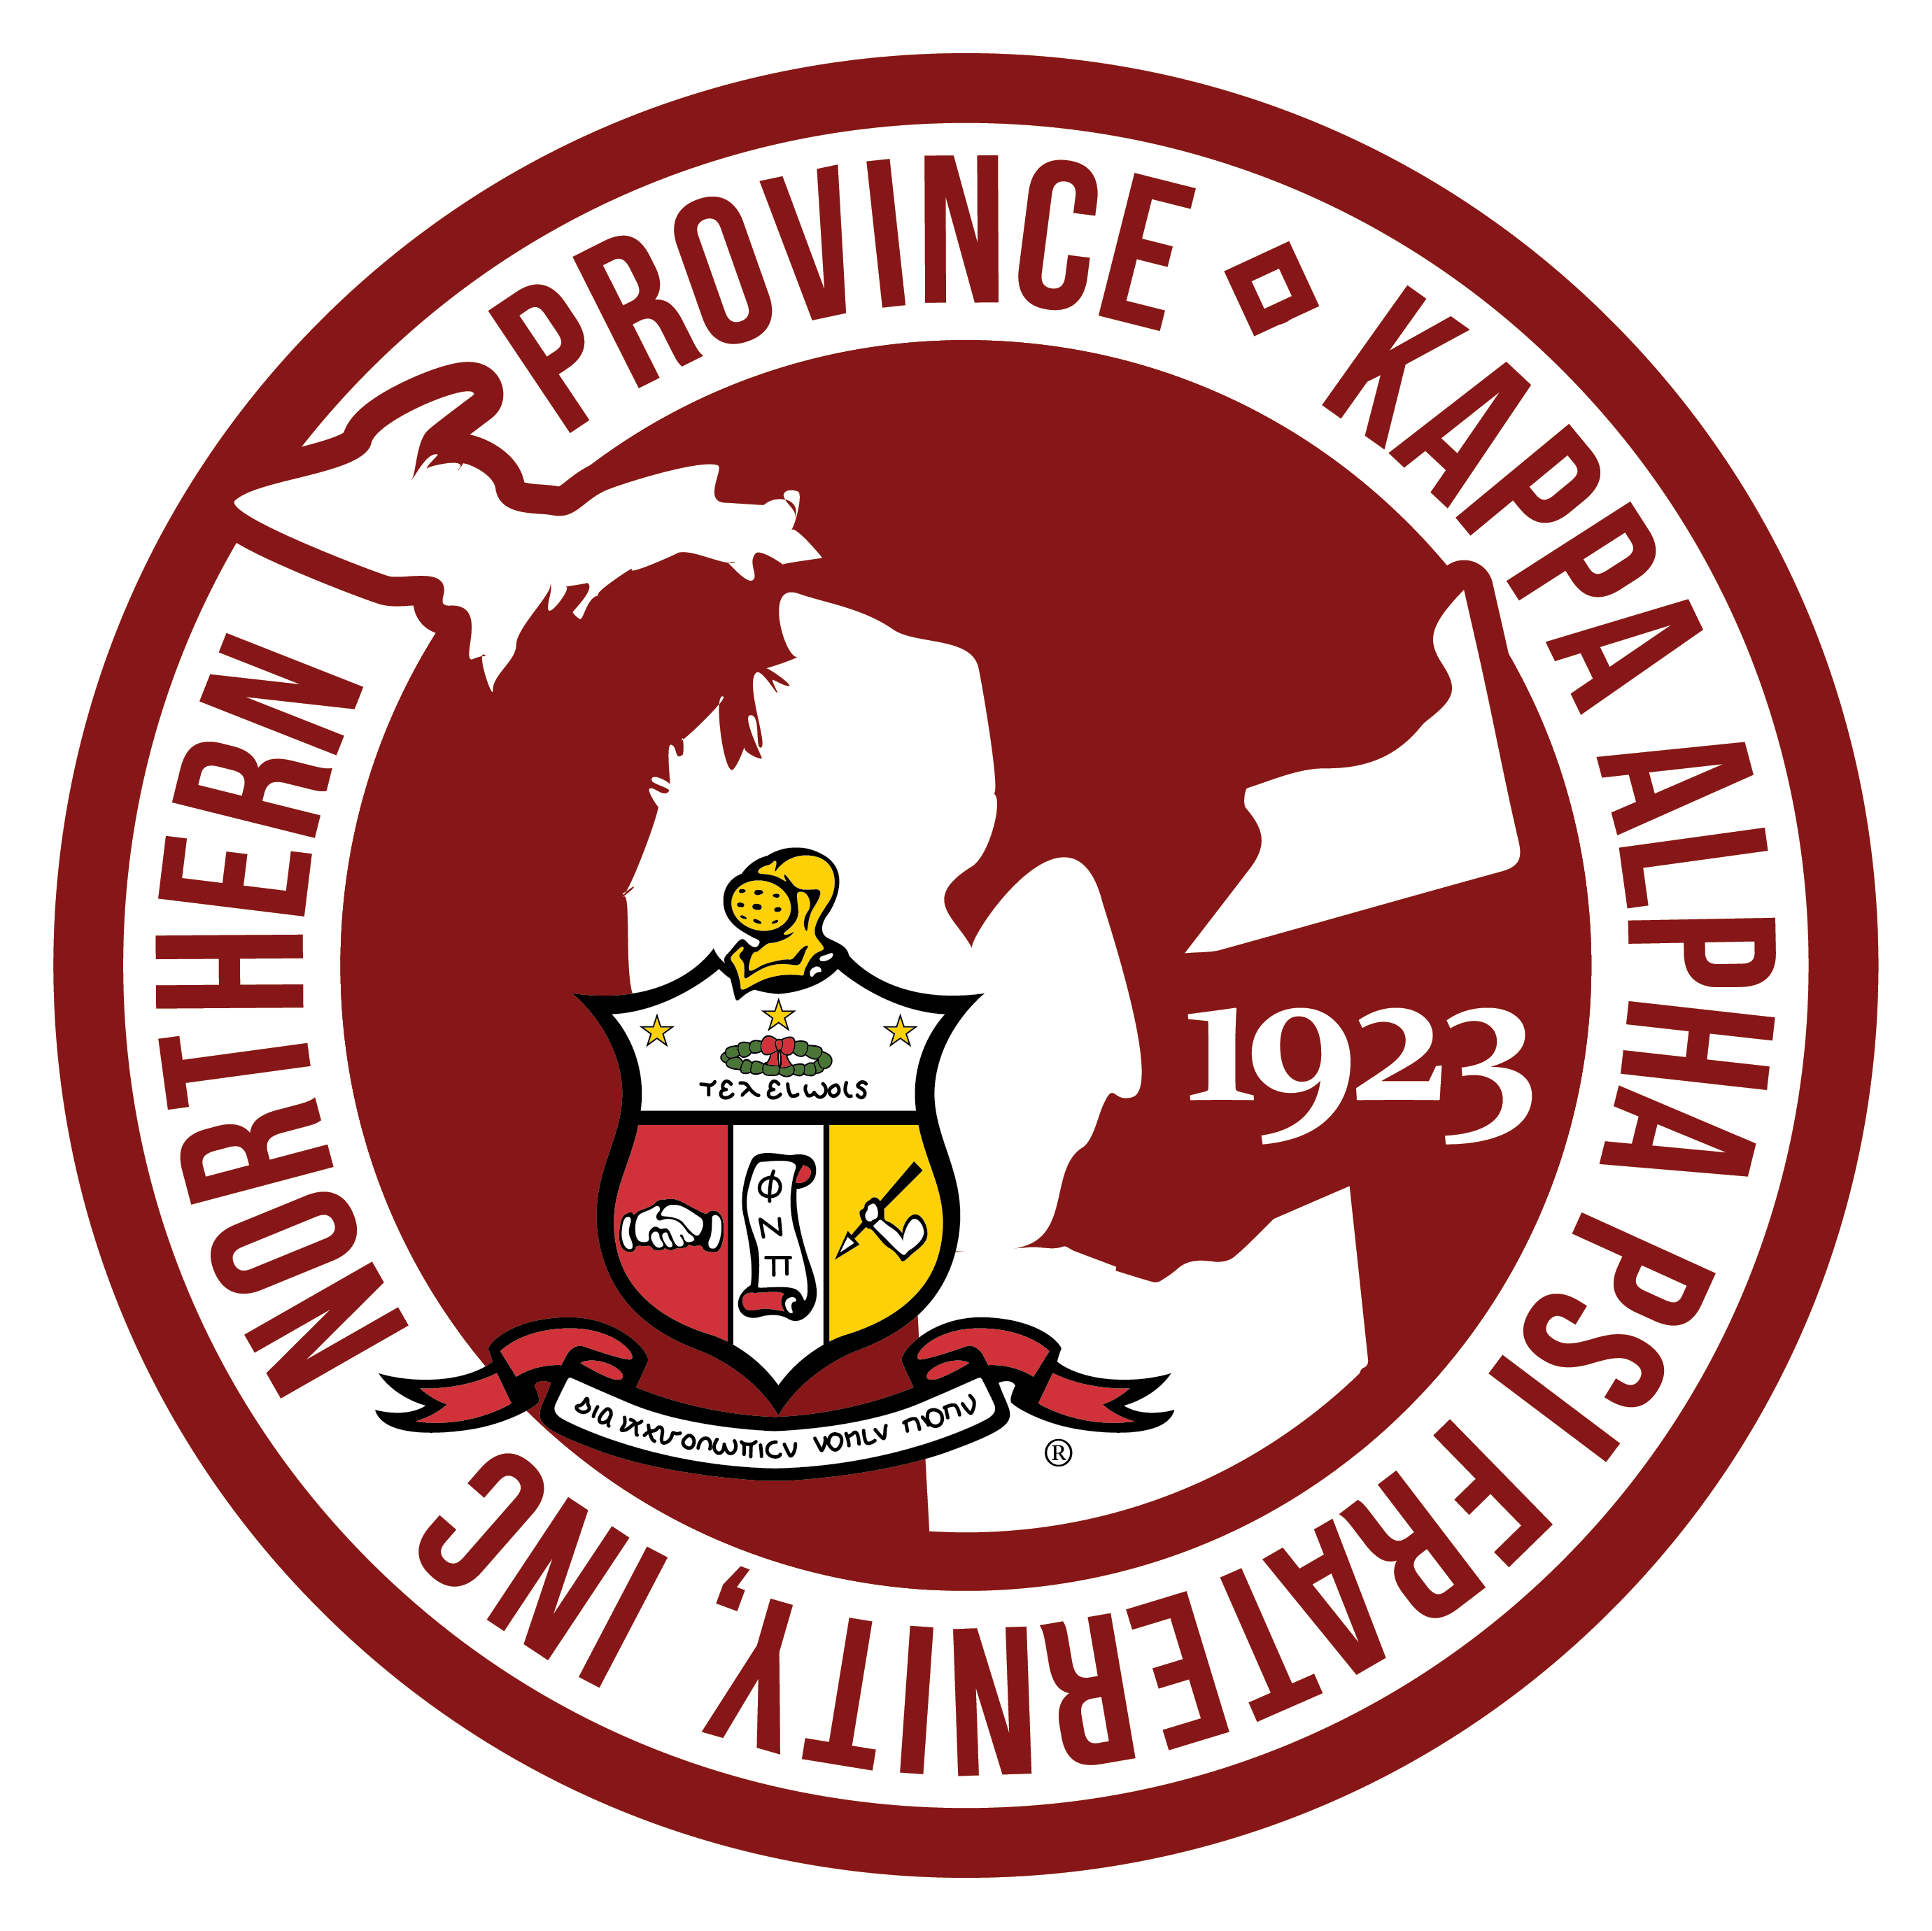 Officers Kappa Alpha Psi Fraternity Inc. Northern Province